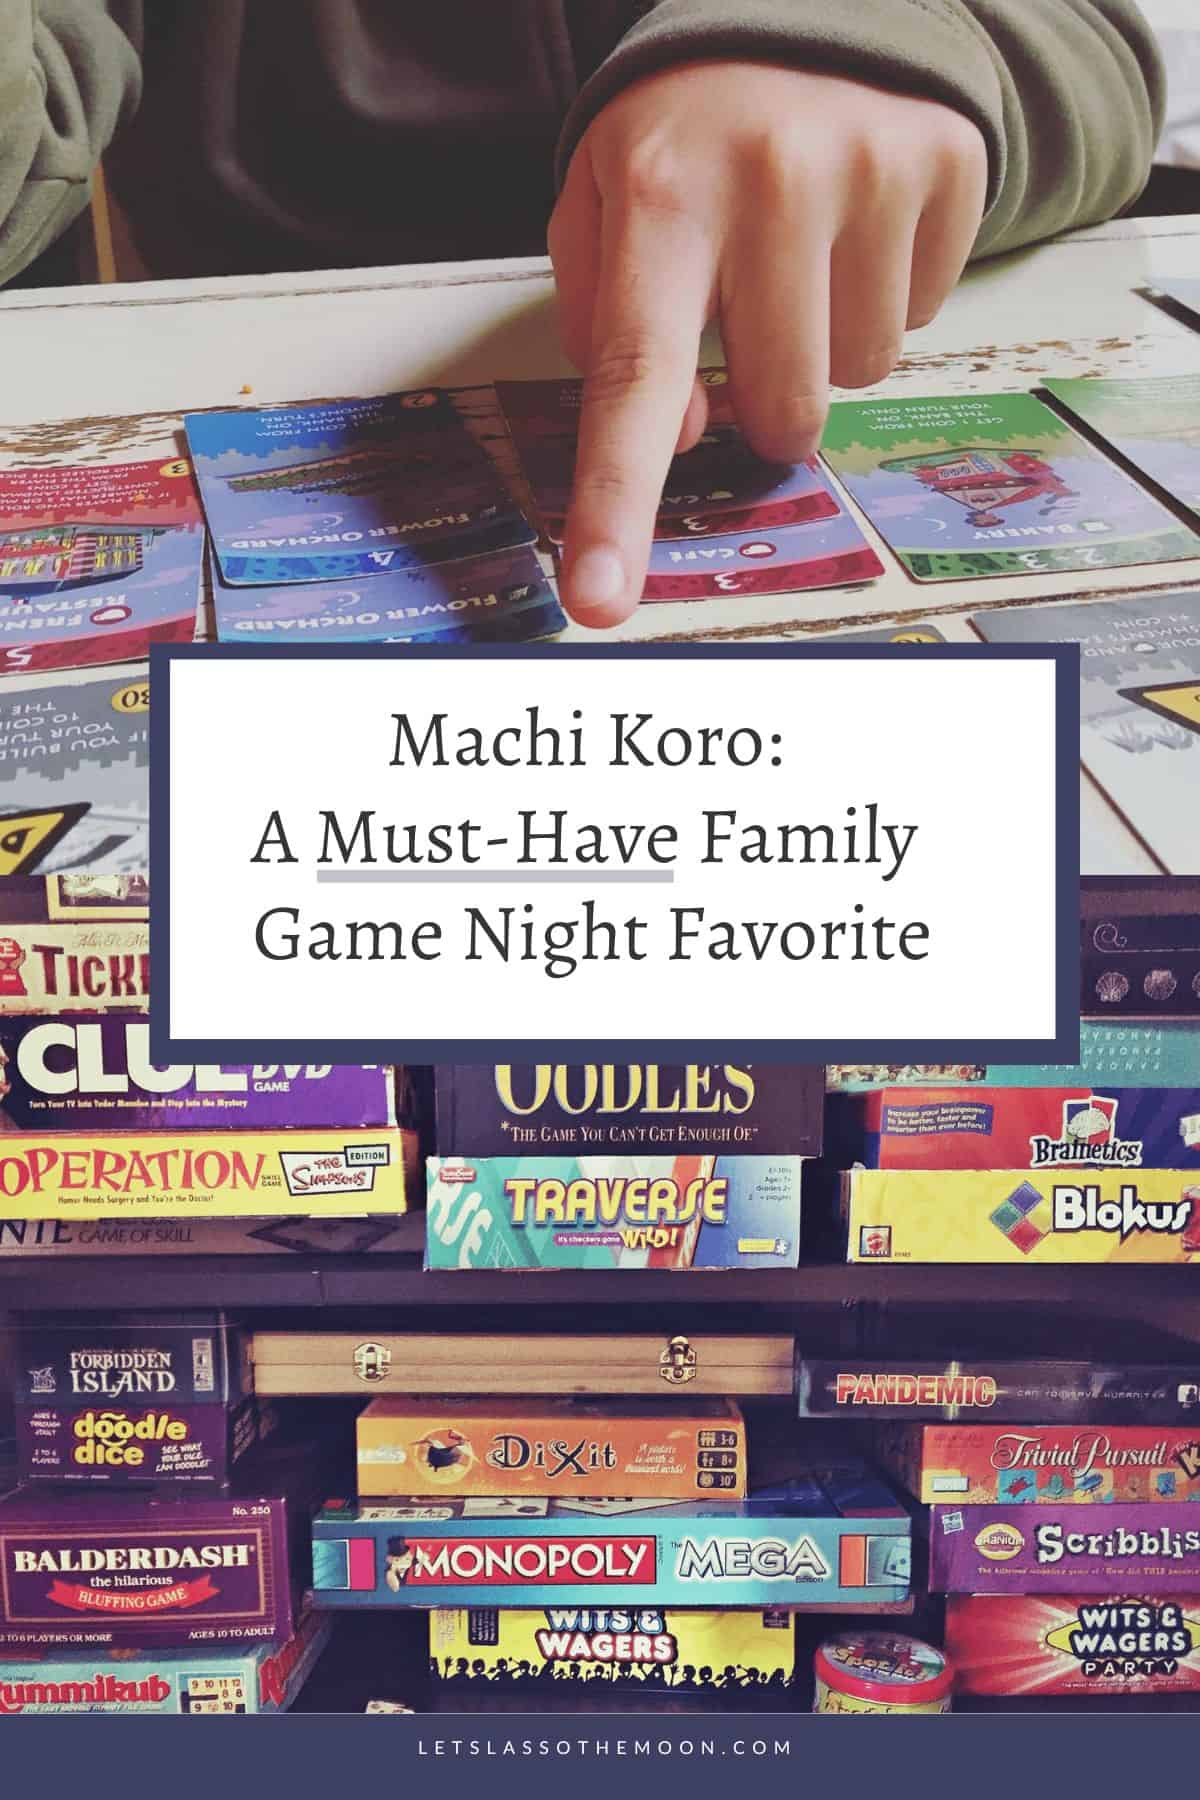 A collage of photos of the game Machi Koro with the article headline for bookmarking this review on Pinterst.